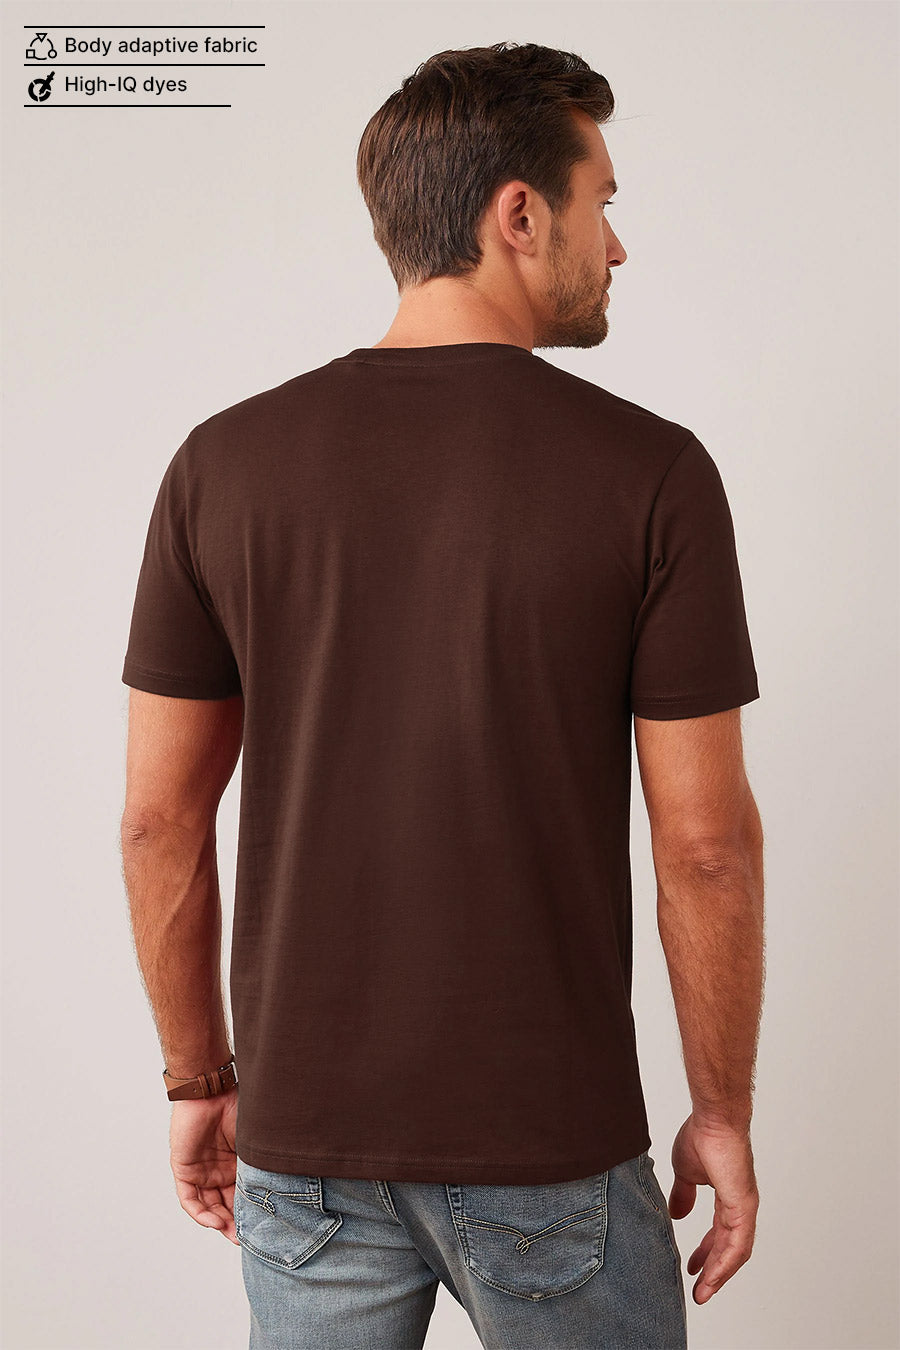 Classic V in Coffee Brown